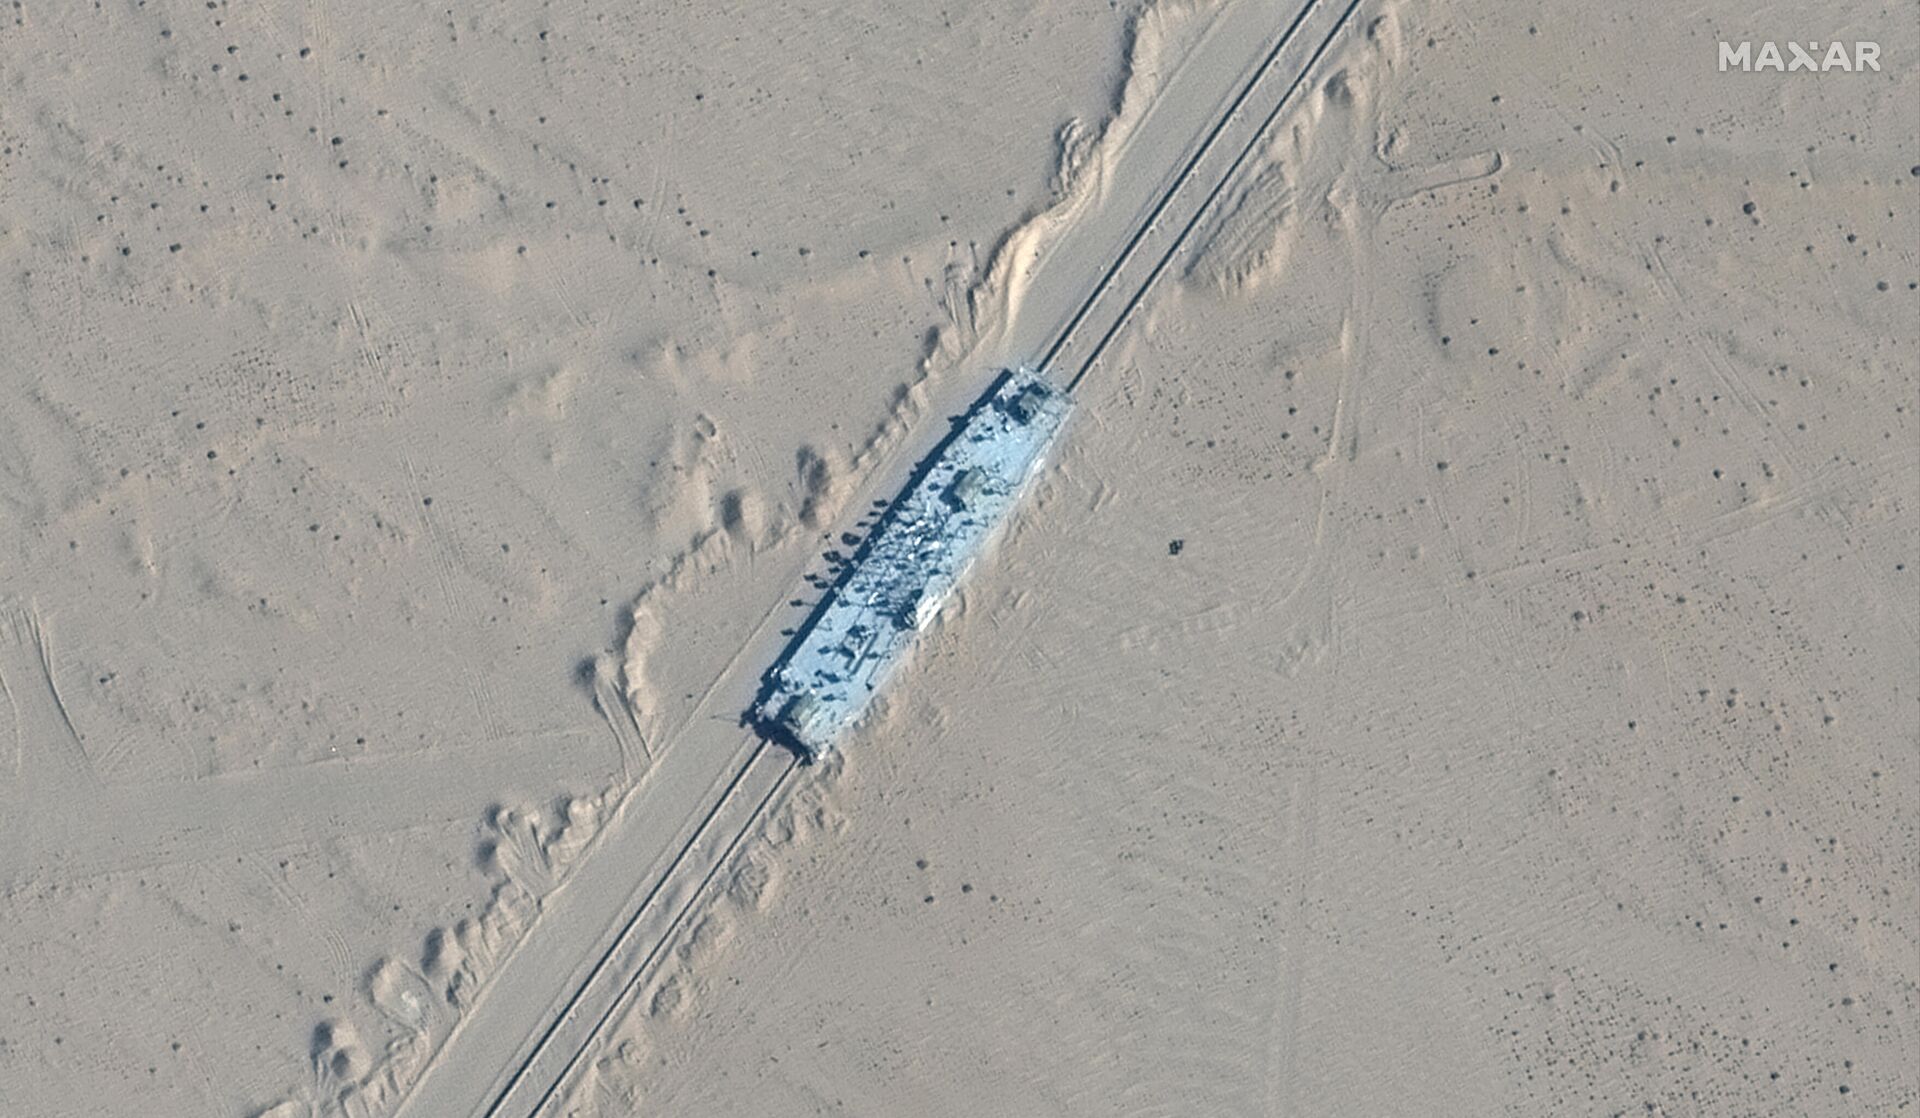 This handout satellite image released by Maxar Technologies on November 8, 2021 shows a mobile target on a rail track in Ruoqiang county in the Taklamakan Desert, in China's western Xinjiang region on October 20, 2021 - Sputnik International, 1920, 08.11.2021